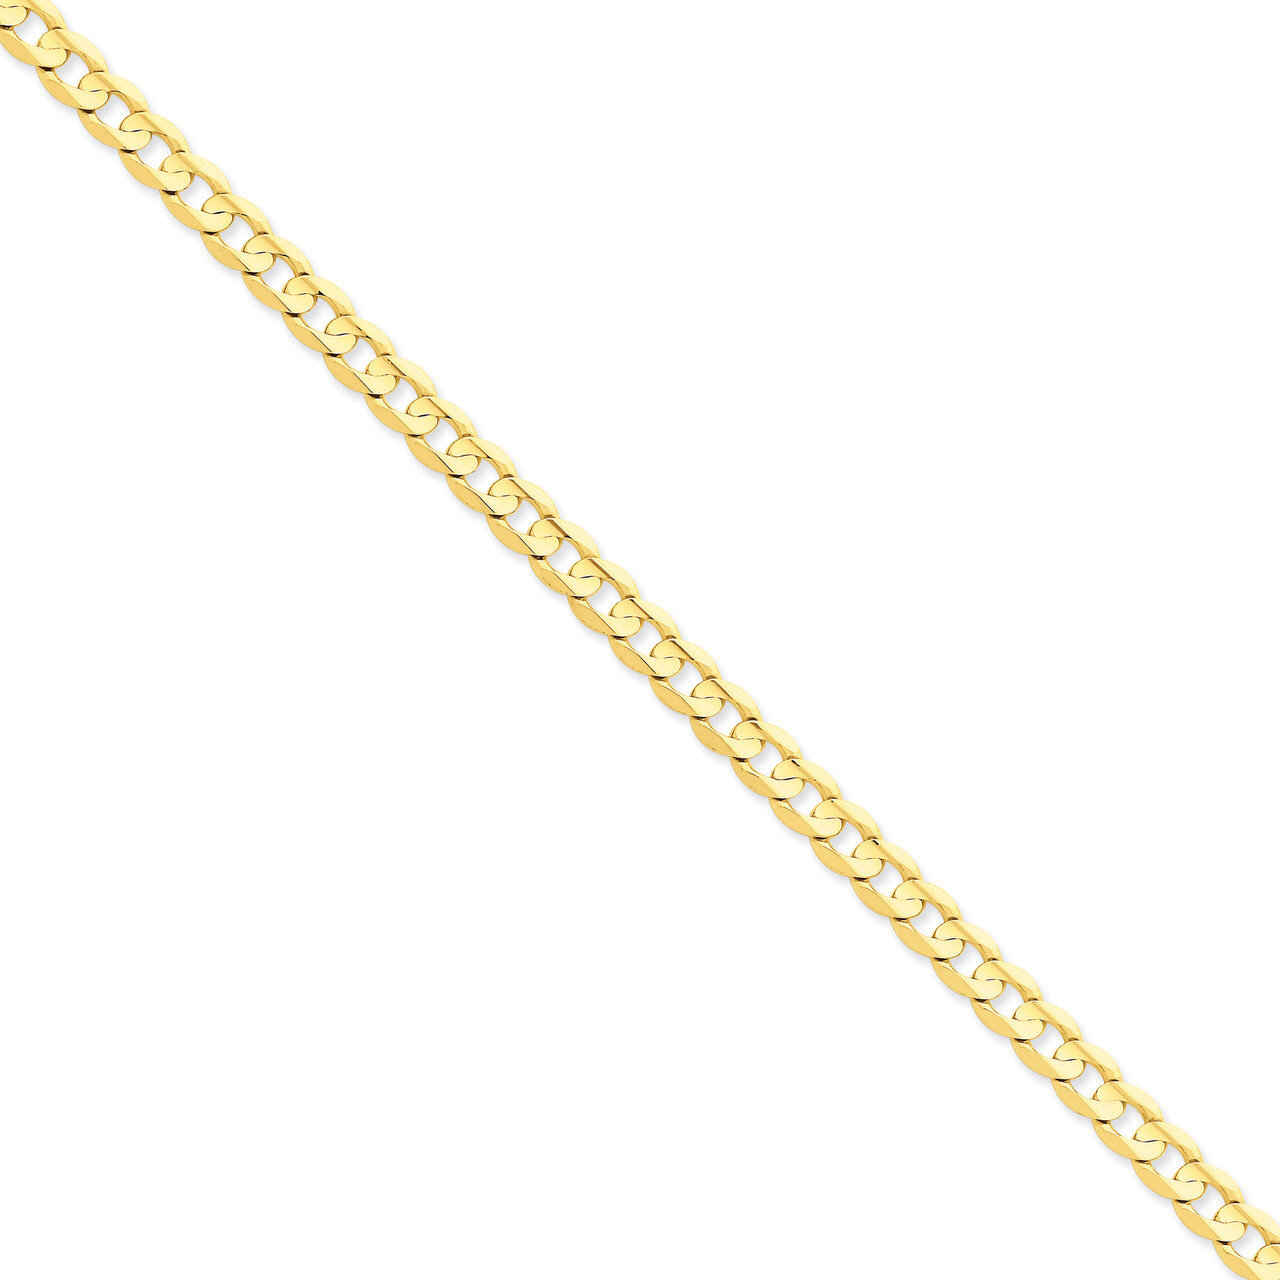 6.75mm Open Concave Curb Chain 20 Inch 14k Gold LCR180-20